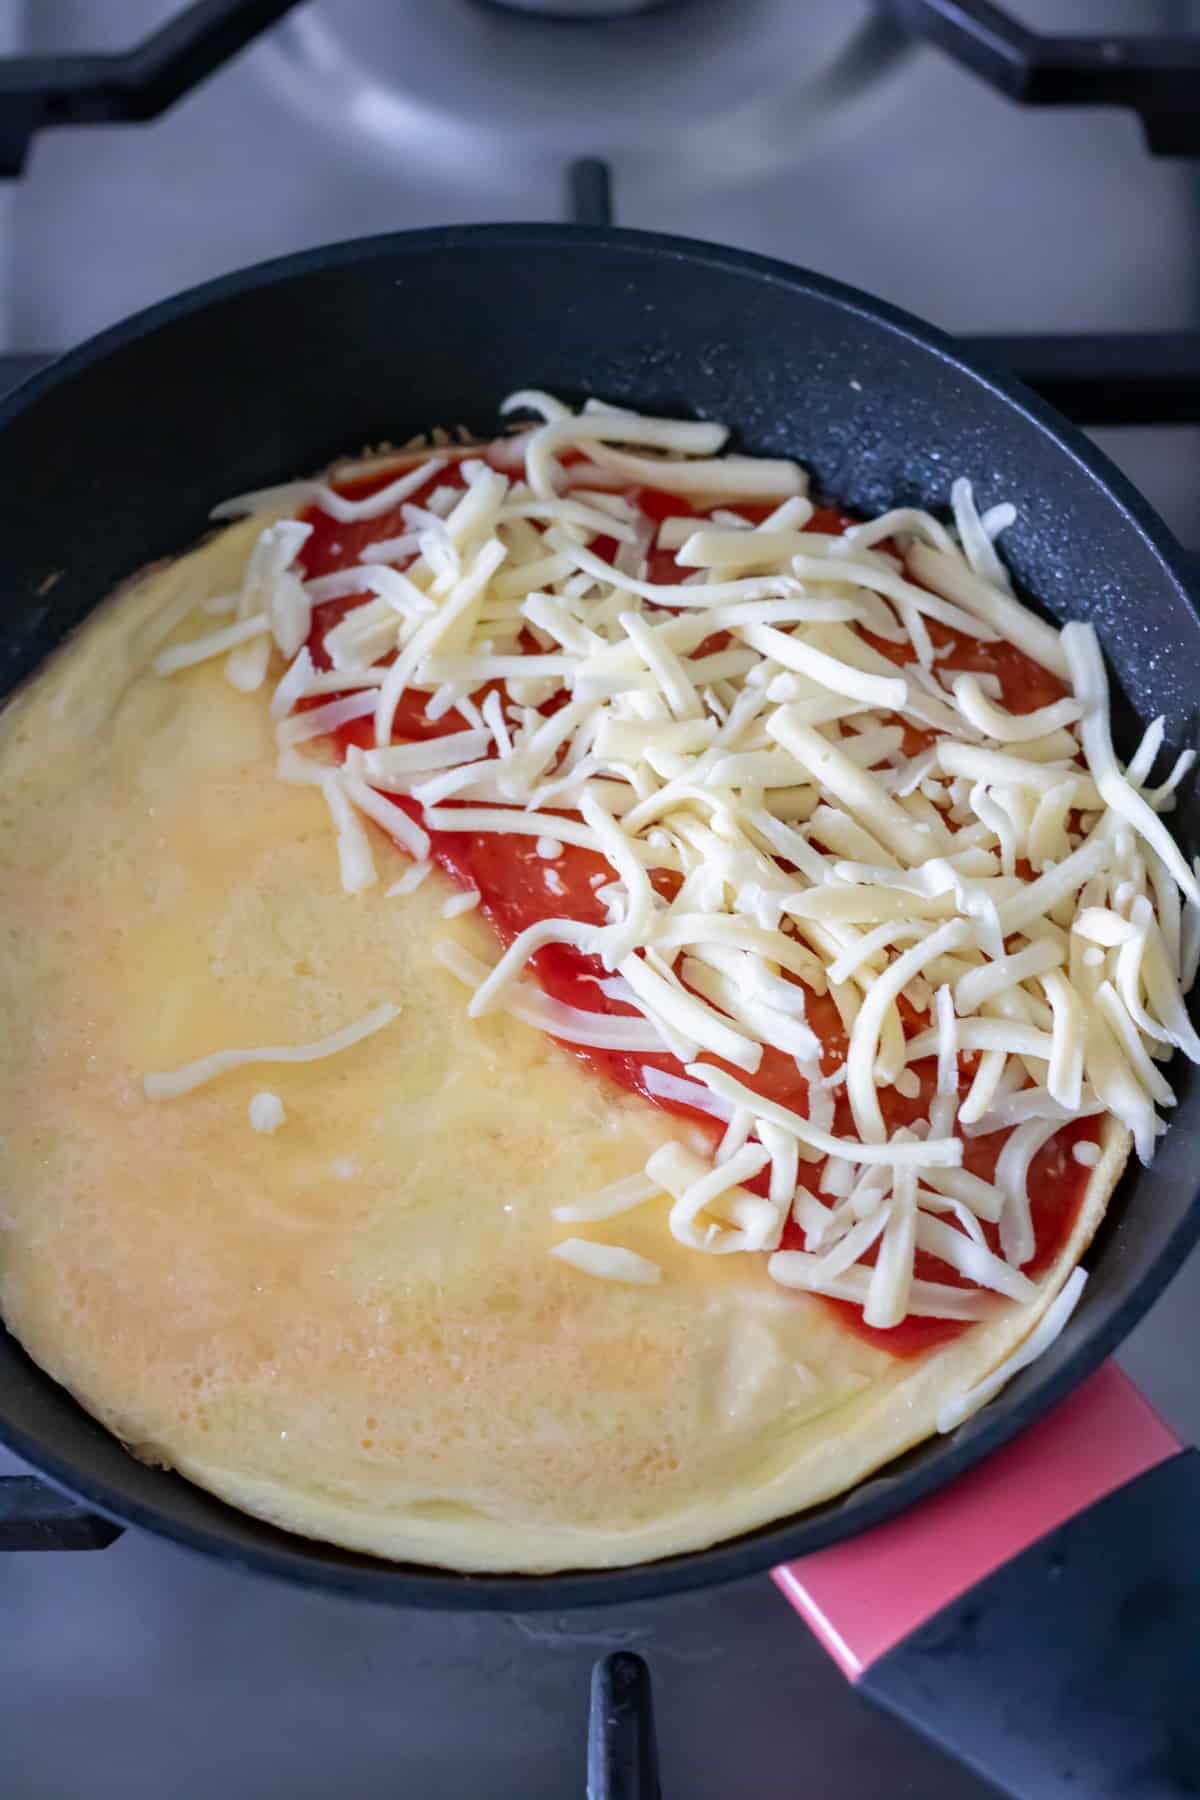 Mozzarella added to the omelet.